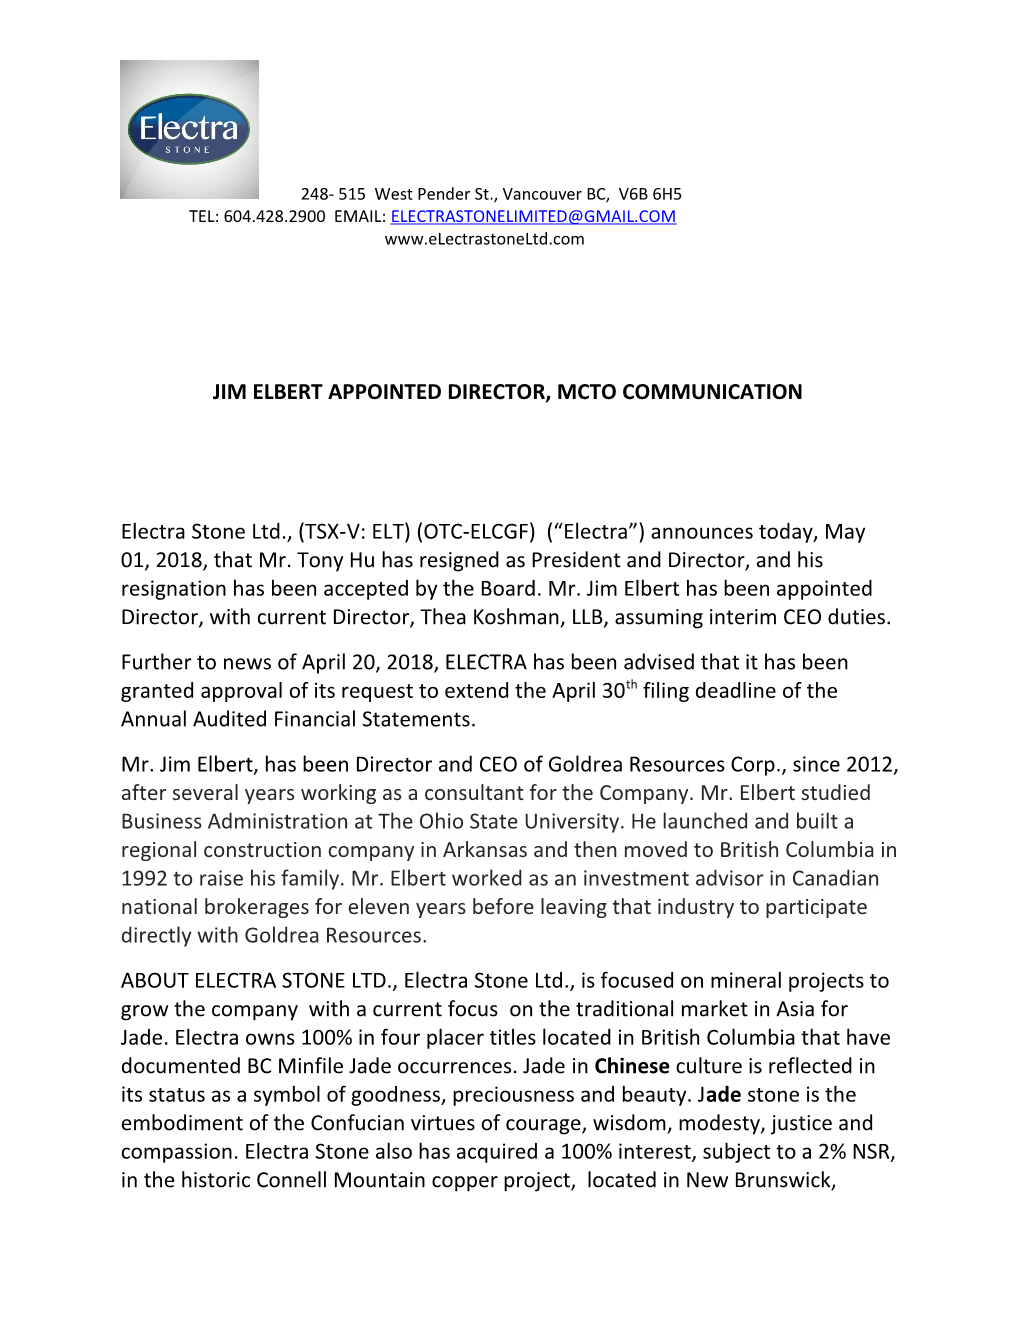 Jim Elbert Appointed Director, Mcto Communication